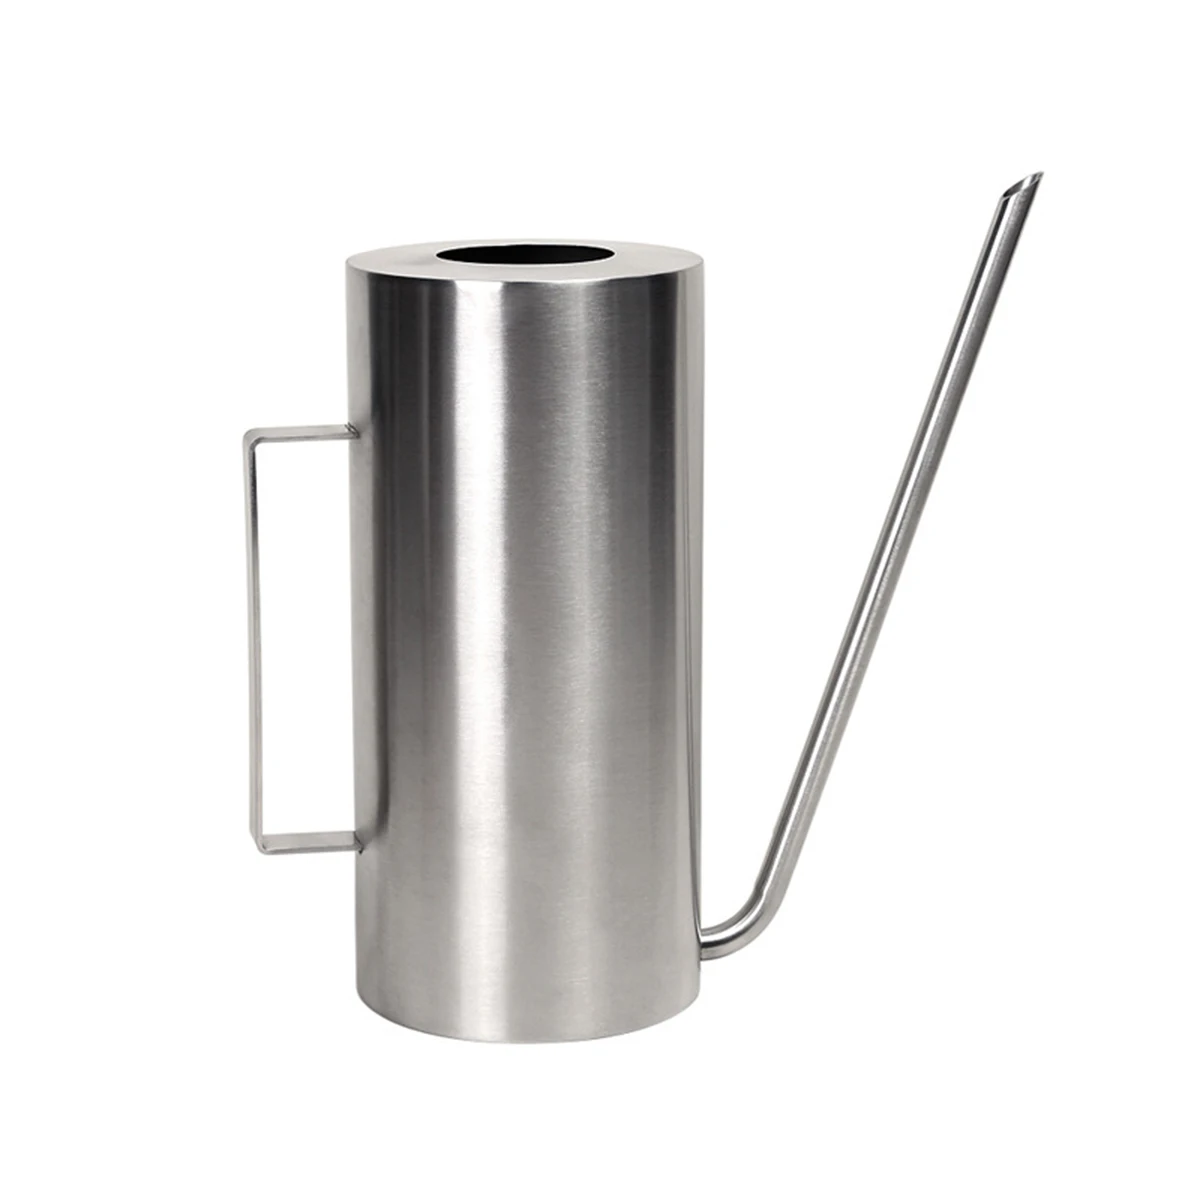 

Watering Can 1.5L Stainless Steel Long Spout Uncovered Watering Pot